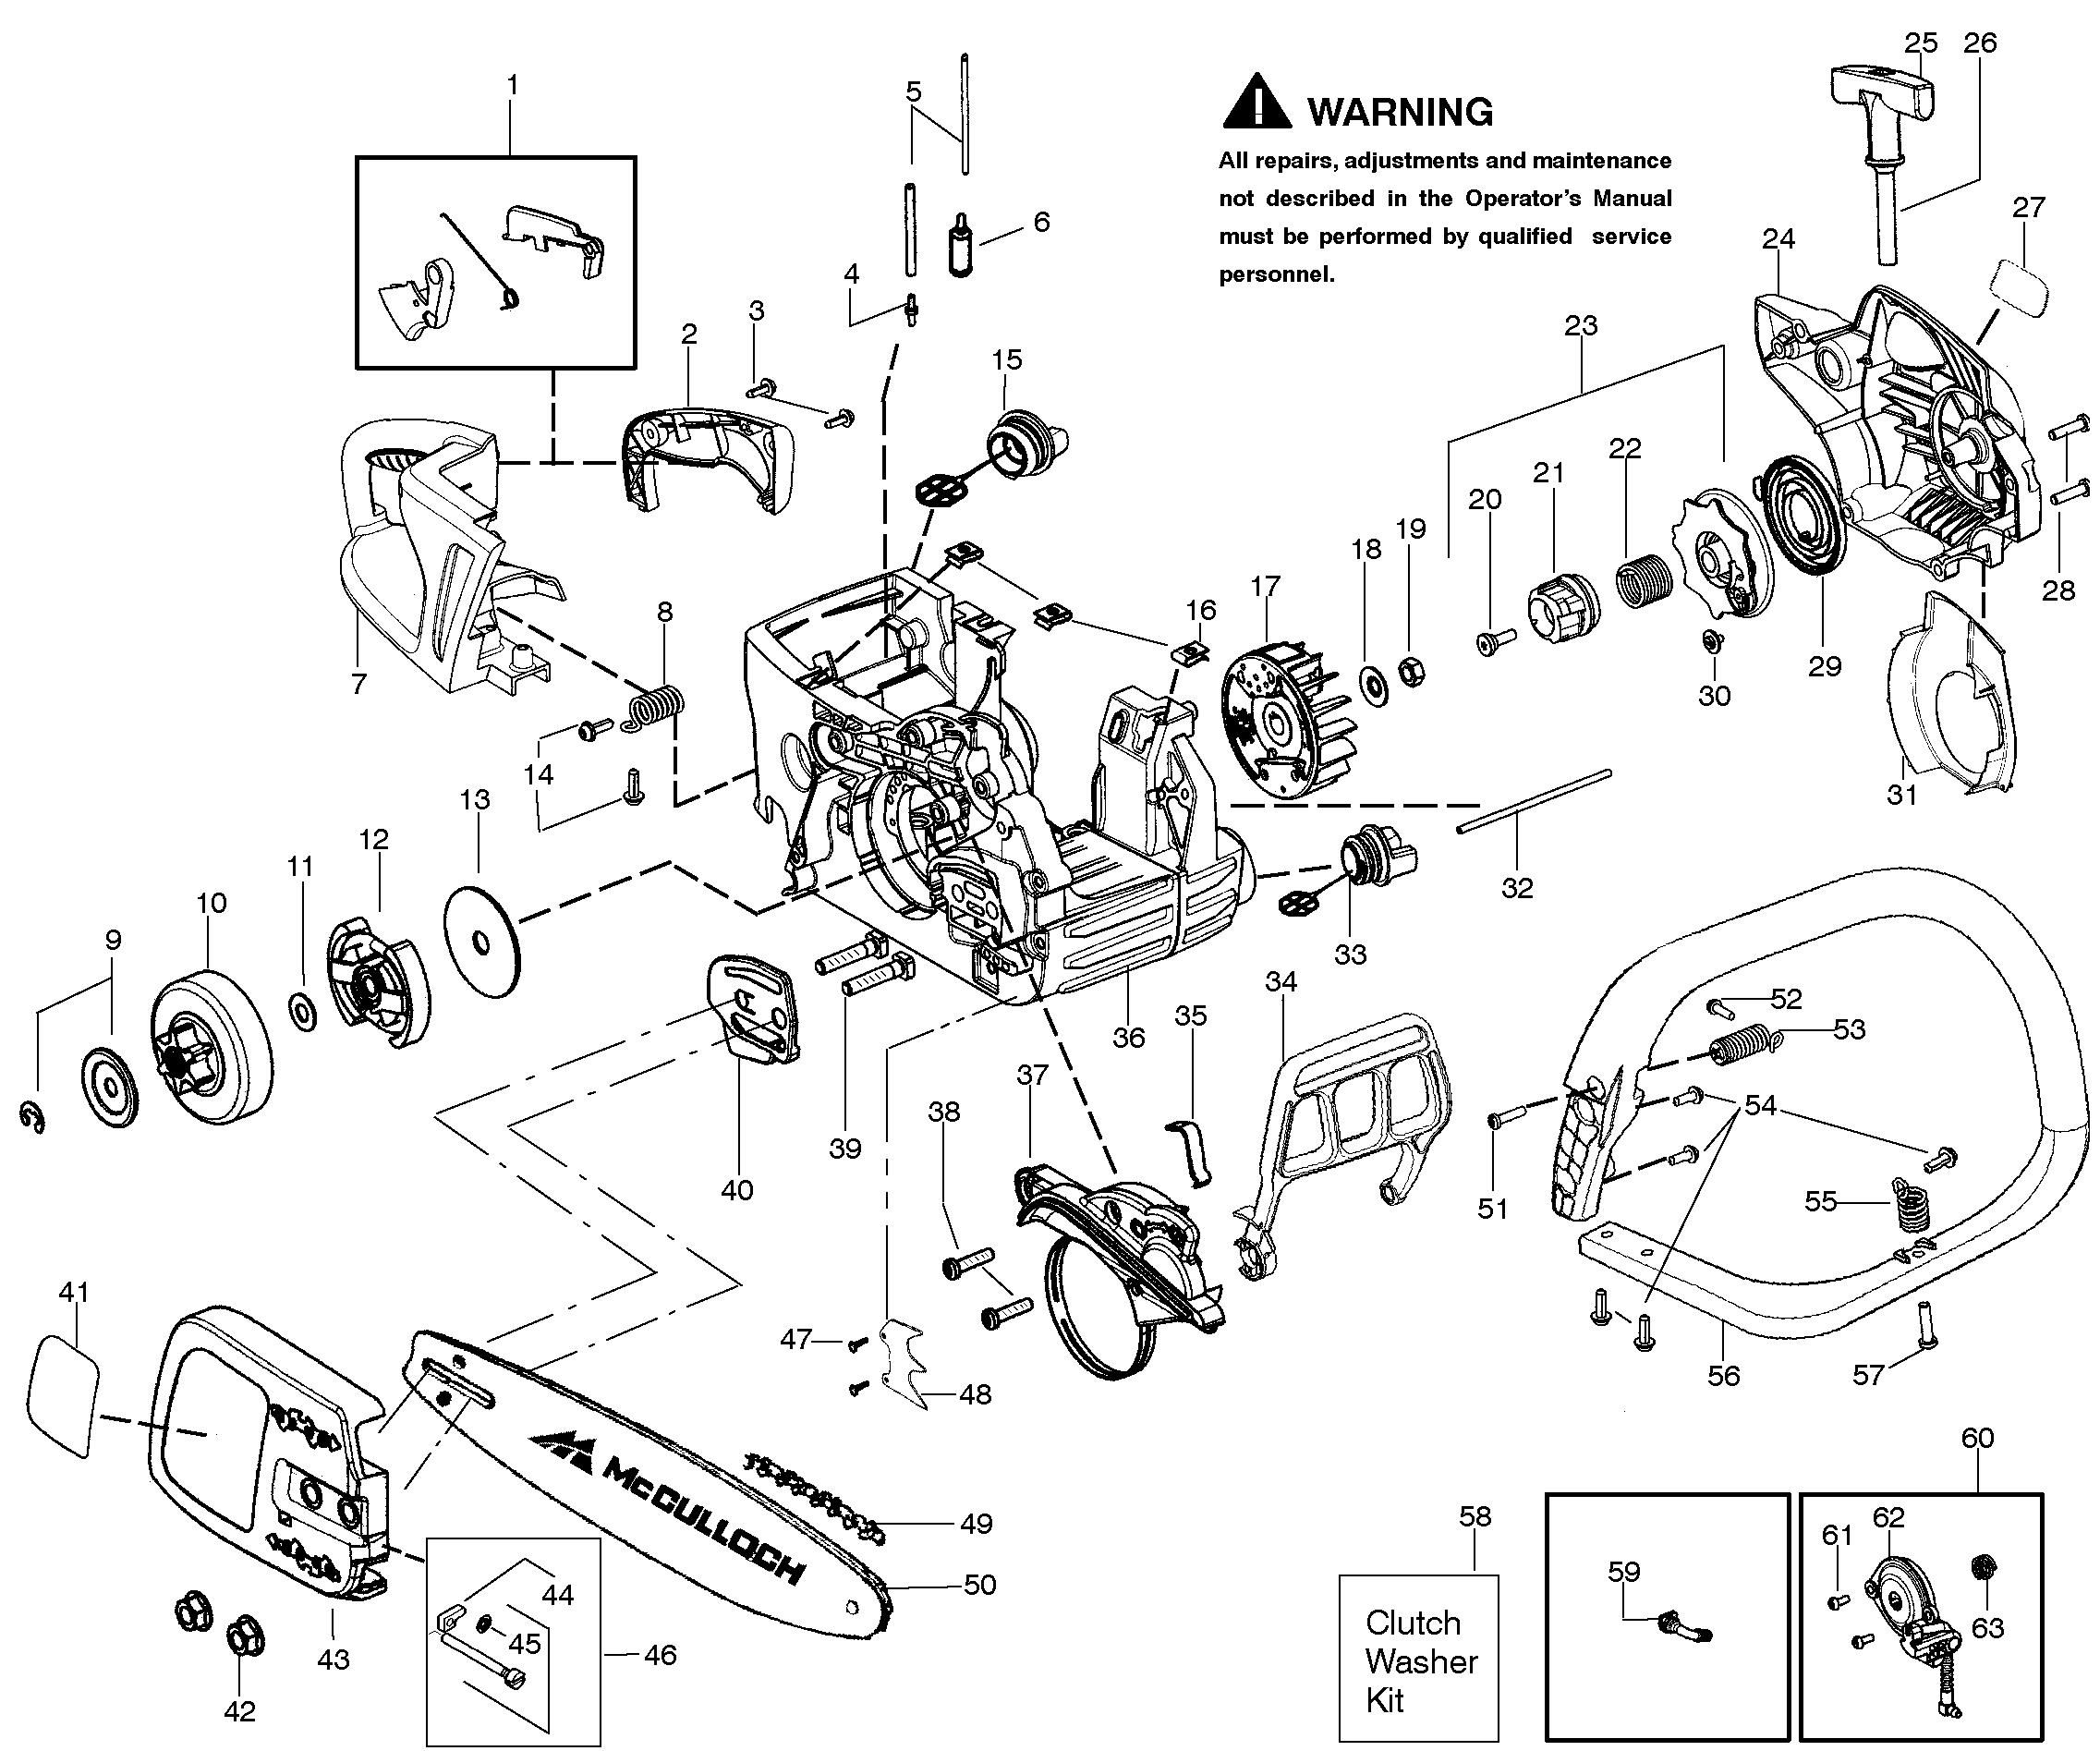 Chassis and appendix 580864201, 545011912, 530016433, 530023877, 580727101, 577167201, 545012112, 530059475, 000000000, 501628301, 000000000, 530057907, 530016419, 530015906, 580940901, 530015922, 578193802, 530015127, 530016134, 530021179, 530059677, 530021180, 530071966, 545045901, 580835201, 530069232, 580767001, 530016432, 576657801, 530016080, 580678501, 530058786, 530057236, 585600601, 530016416, 579061501, 530071893, 530016432, 530016133, 530057910, 581359301, 530015917, 545012201, 530015826, 530038593, 530069611, 530016439, 530014381, 585404252, 580968201, 530016432, 530016443, 530059480, 530015906, 530059479, 530057878, 530016432, 530071945, 530057924, 530071891, 545227101, 581071401, 530037820